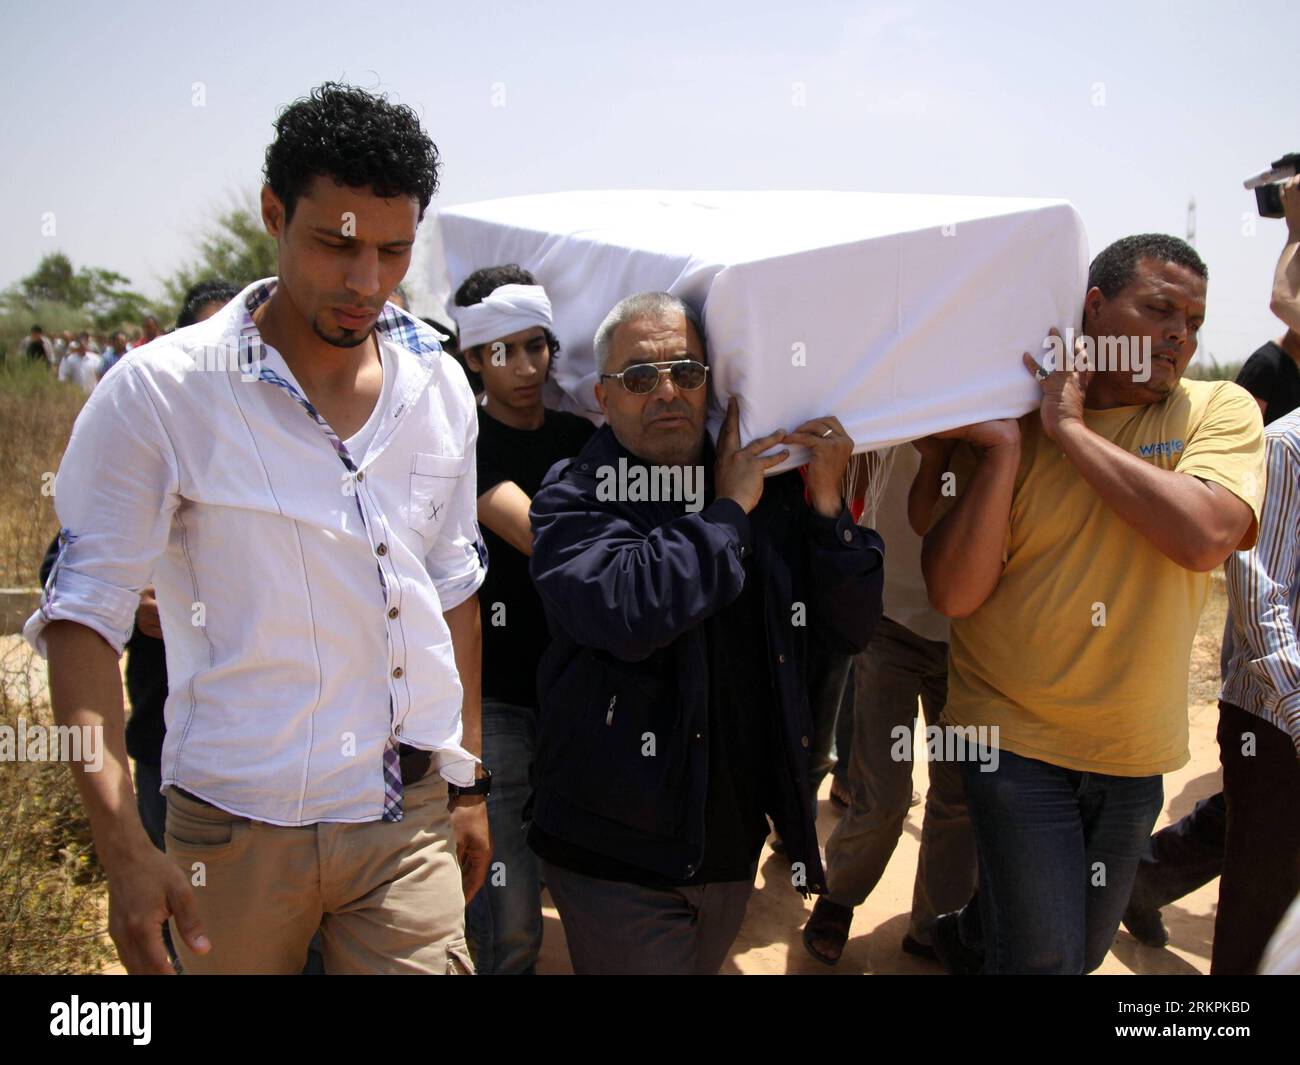 Bildnummer: 58013858  Datum: 21.05.2012  Copyright: imago/Xinhua (120521) -- TRIPOLI, May 21, 2012 (Xinhua) -- Relatives and friends carry the body of Abdelbaset Ali Mohmet al-Megrahi, the only person convicted in the case of the Lockerbie bombing in 1988 that killed 270 people, during his funeral in Janzur, a suburb west of the Libyan capital Tripoli on May 21, 2012. (Xinhua/Hamza Turkia) (srb) LIBYA-TRIPOLI-LOCKERBIE ATTACK-MEGRAHI PUBLICATIONxNOTxINxCHN People Politik Beerdigung Trauerfeier Lockerbie Attentäter Attentat x0x xst premiumd 2012 quer      58013858 Date 21 05 2012 Copyright Imag Stock Photo